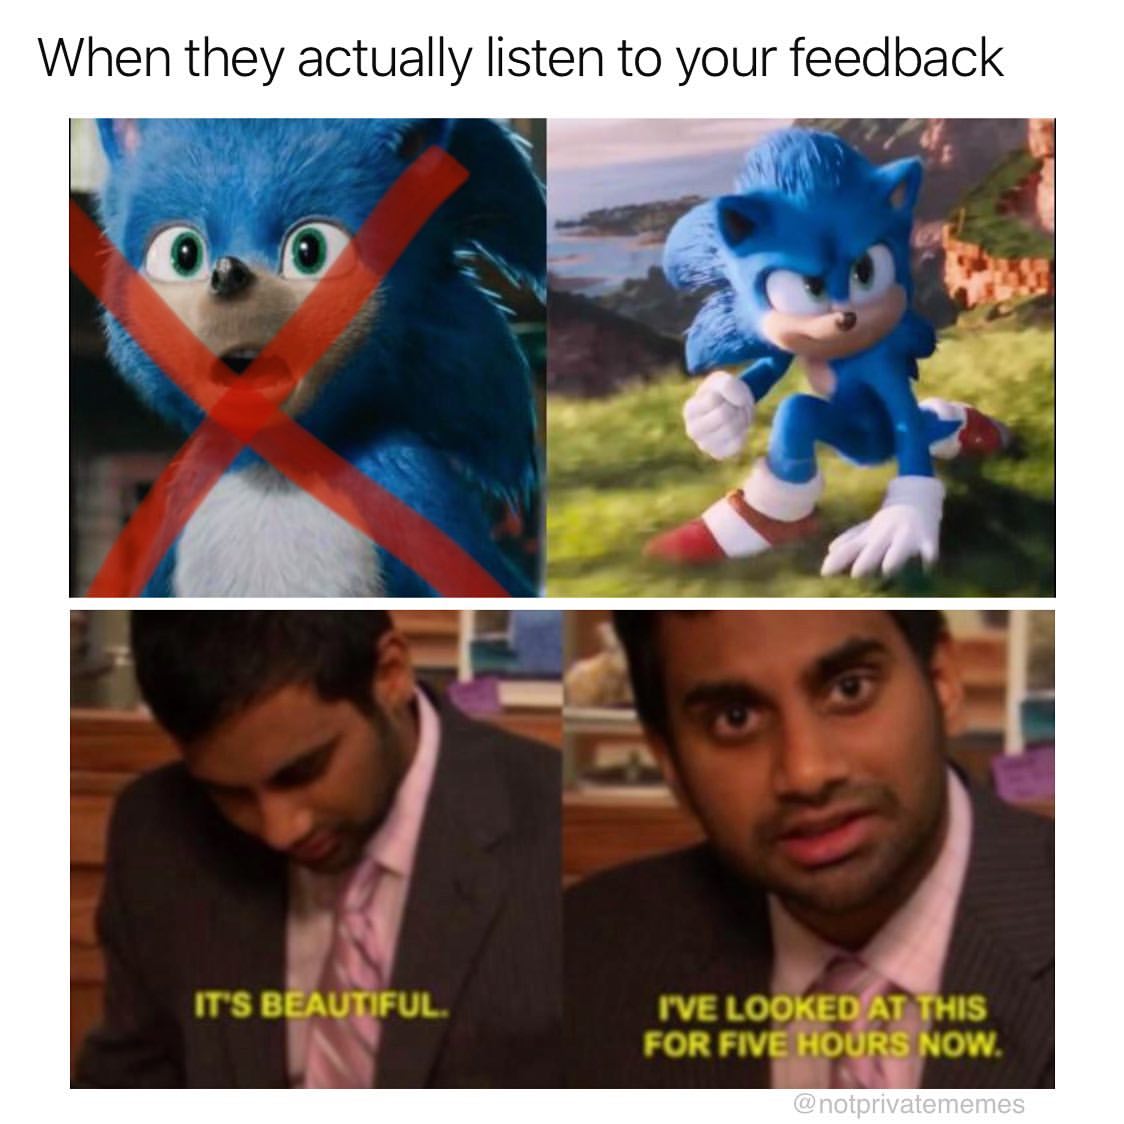 When they actually listen to your feedback. It's beautiful. I've looked ...